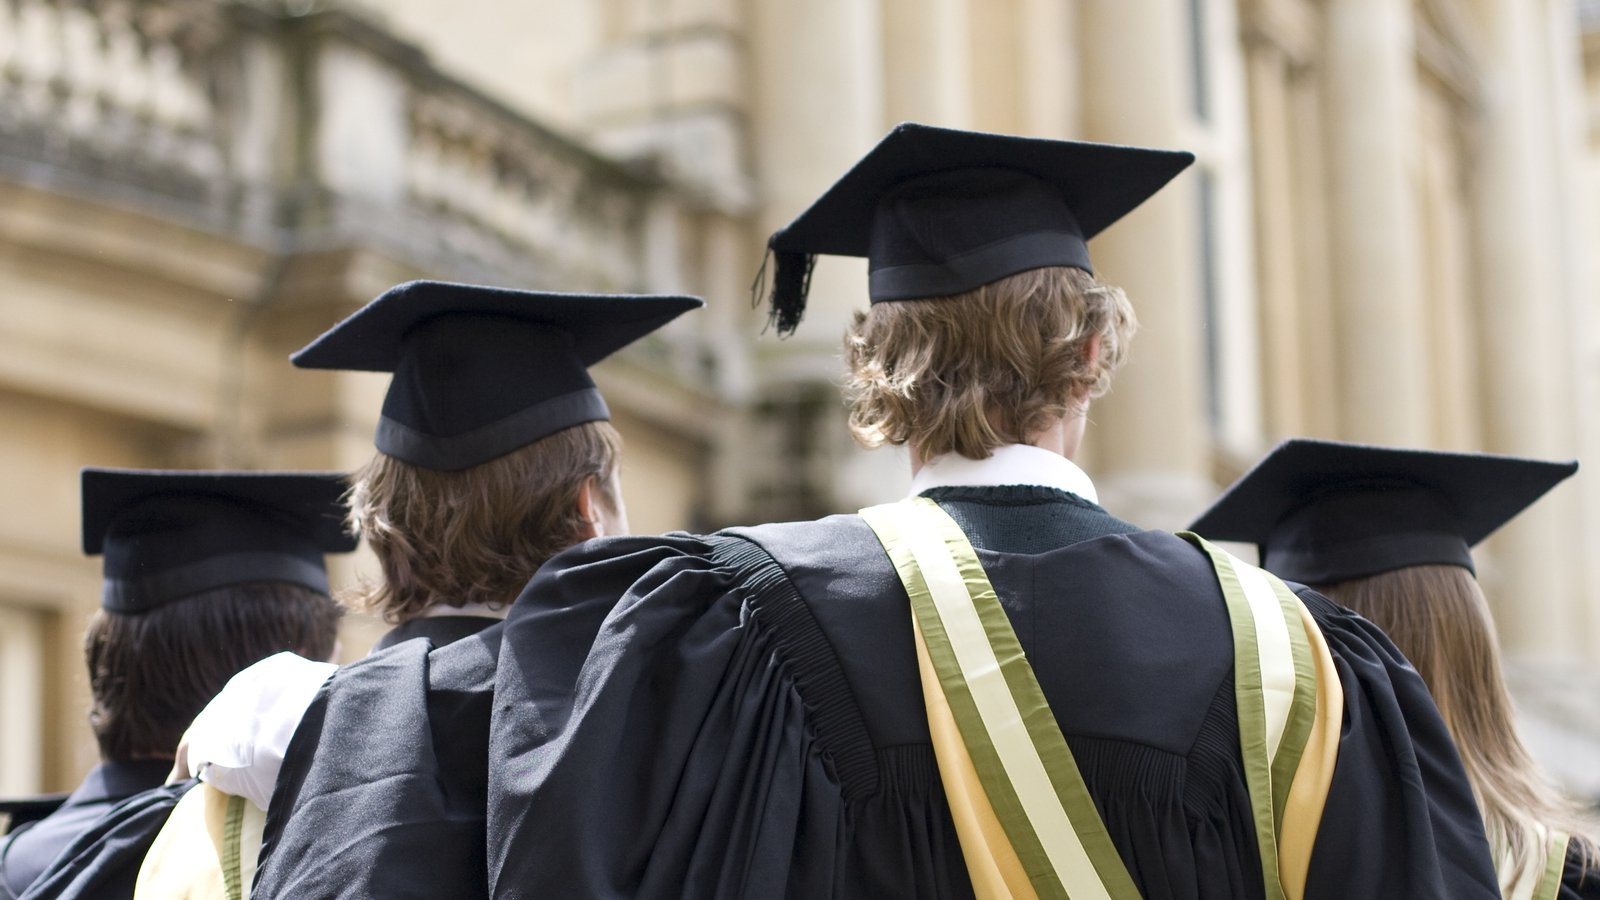 Growing numbers of graduates overqualified for jobs